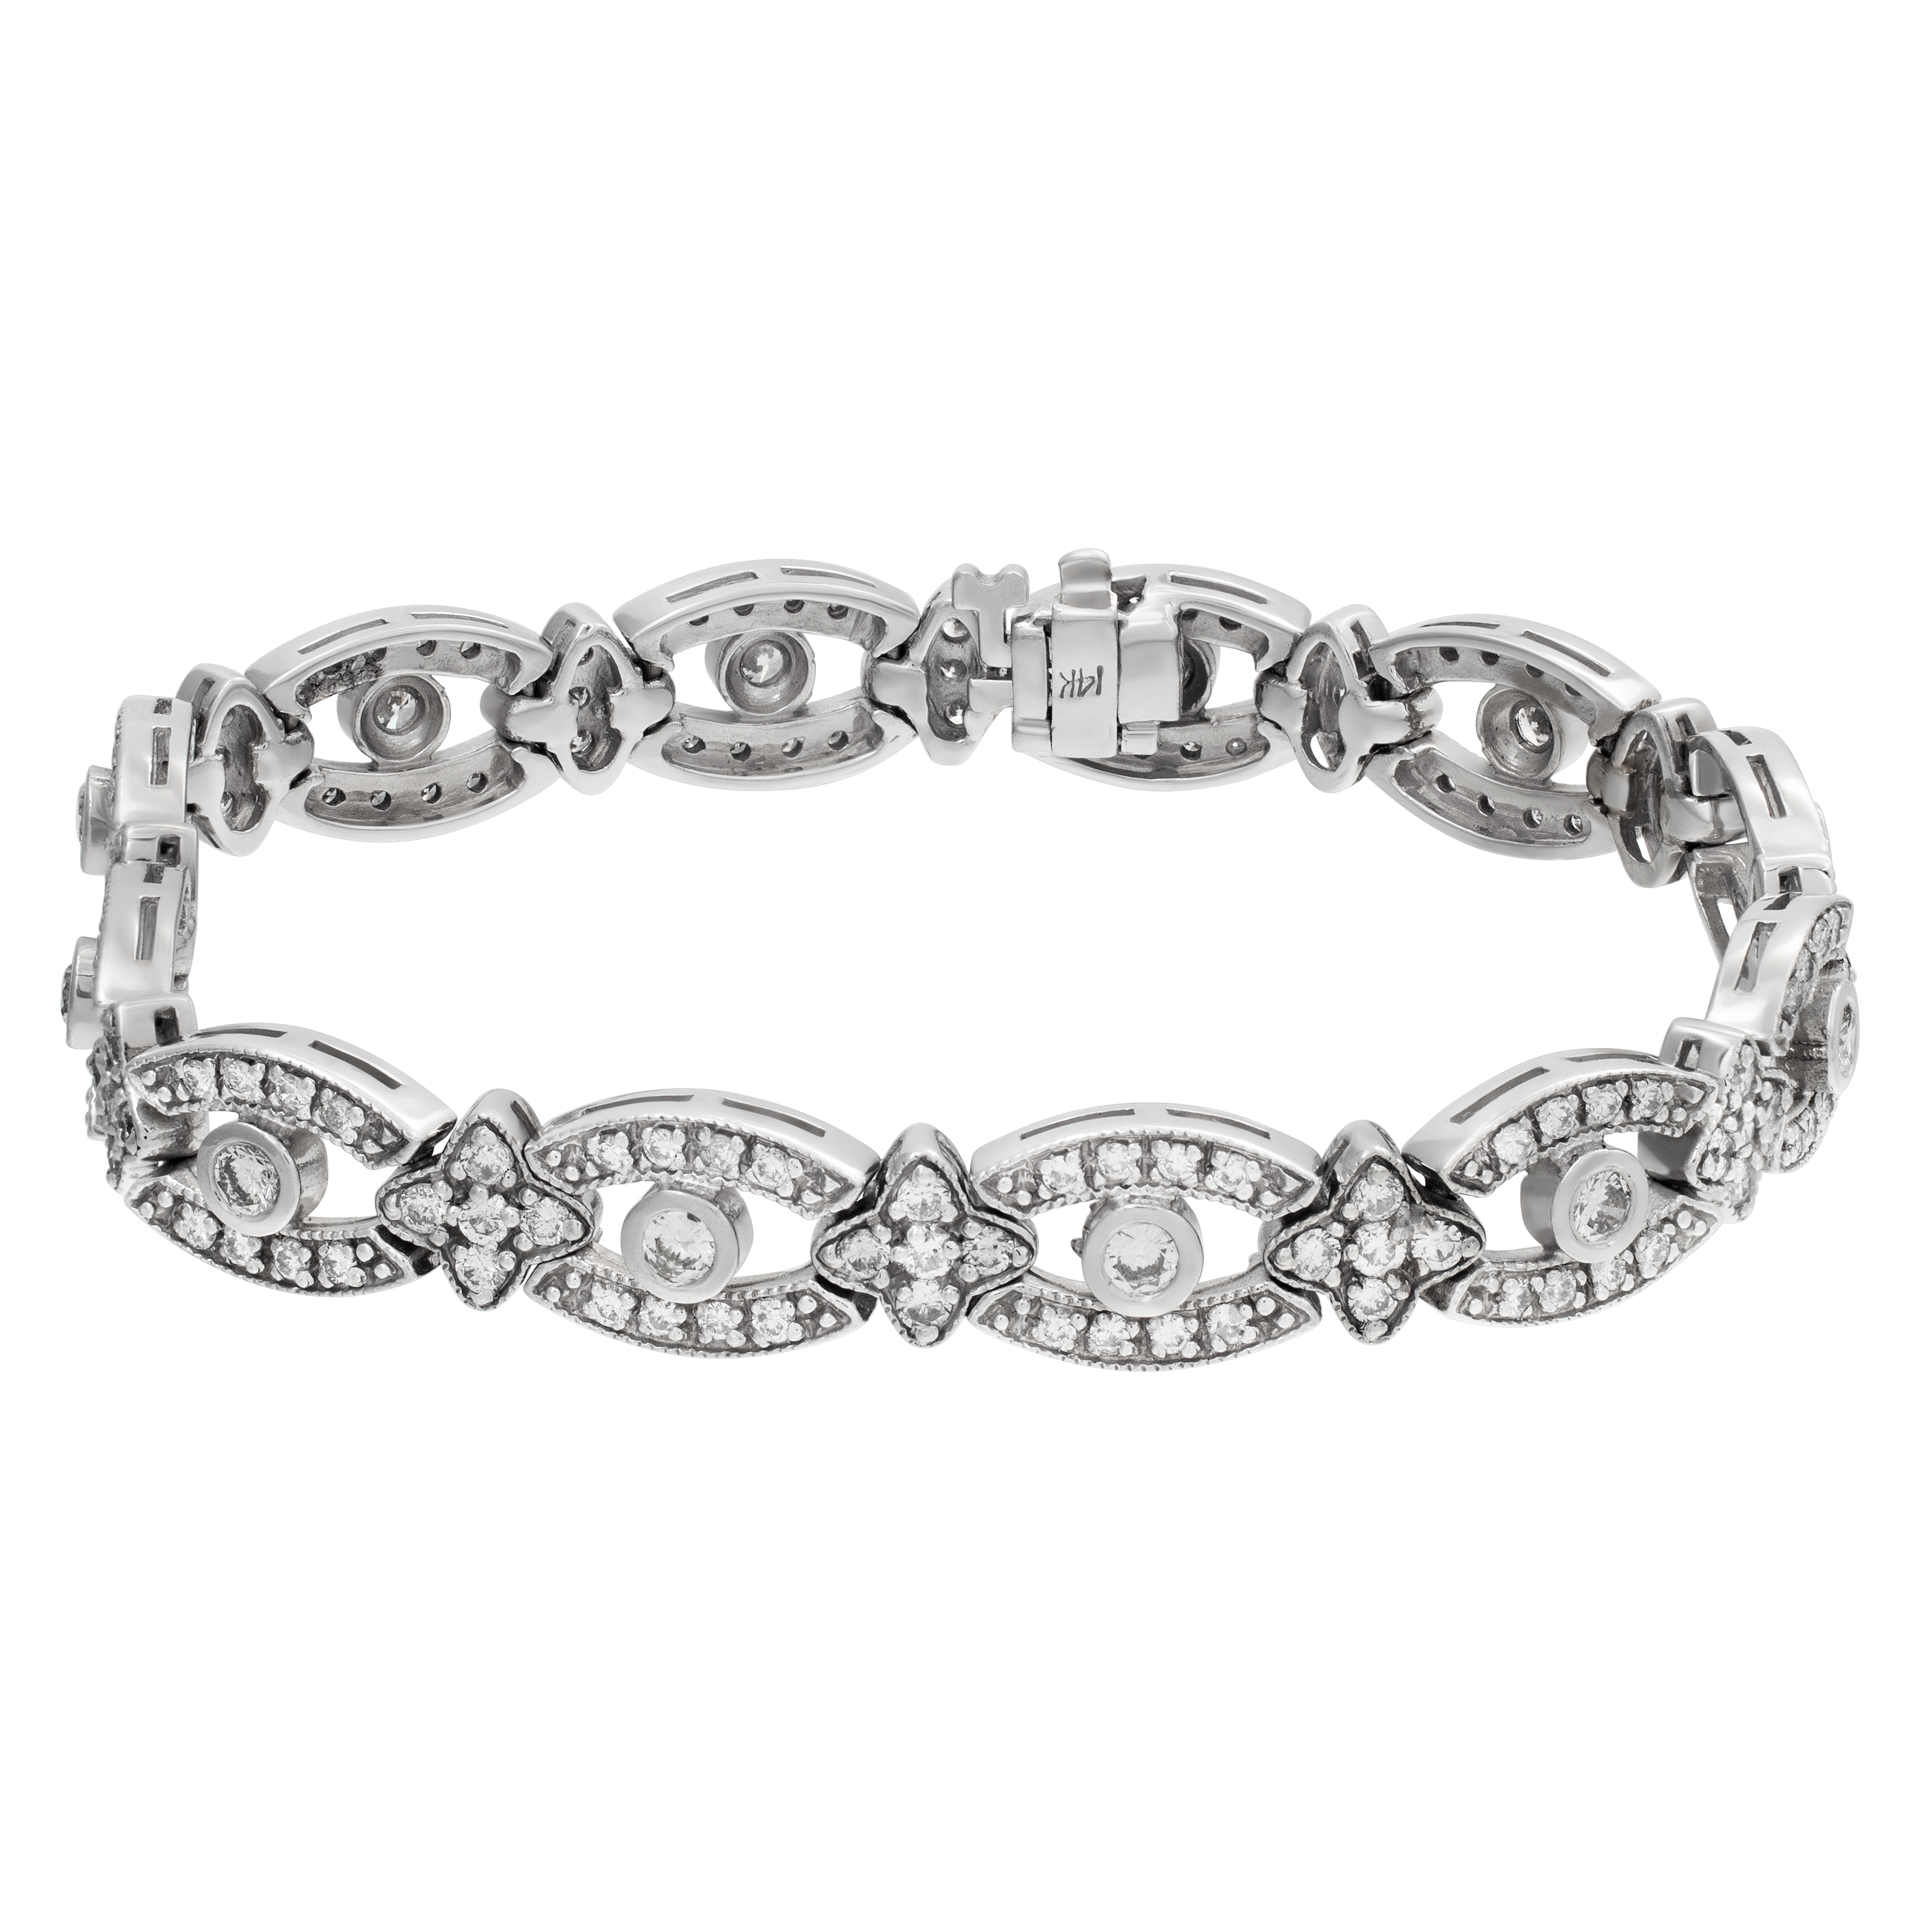 Diamonds line bracelet set in 14K white gold. Round brilliant cut diamonds total weight approx. 3 carats